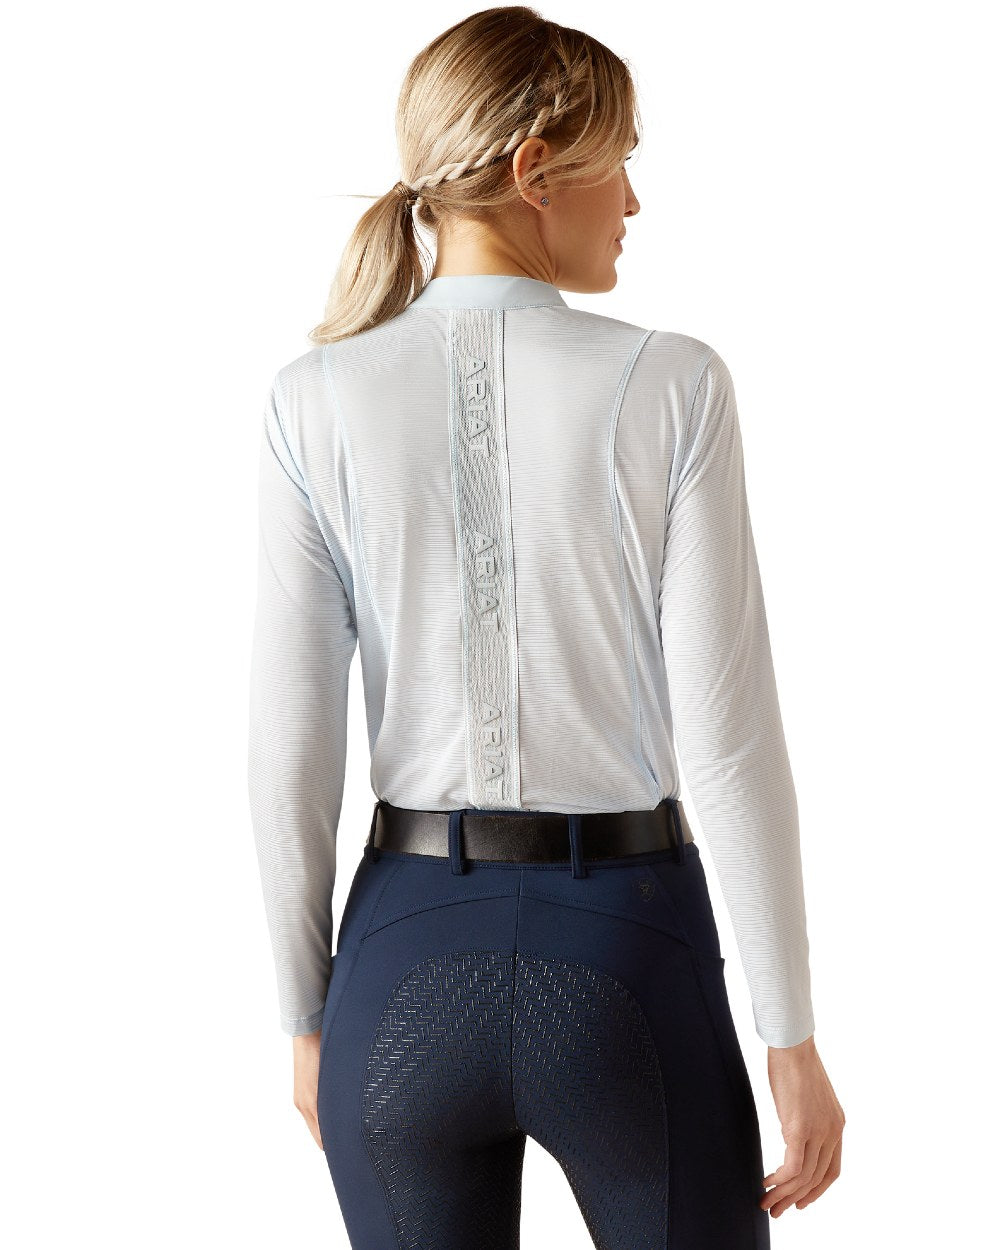 Skyride Coloured Ariat Womens Breathe Quarter Zip Baselayer On A White Background 